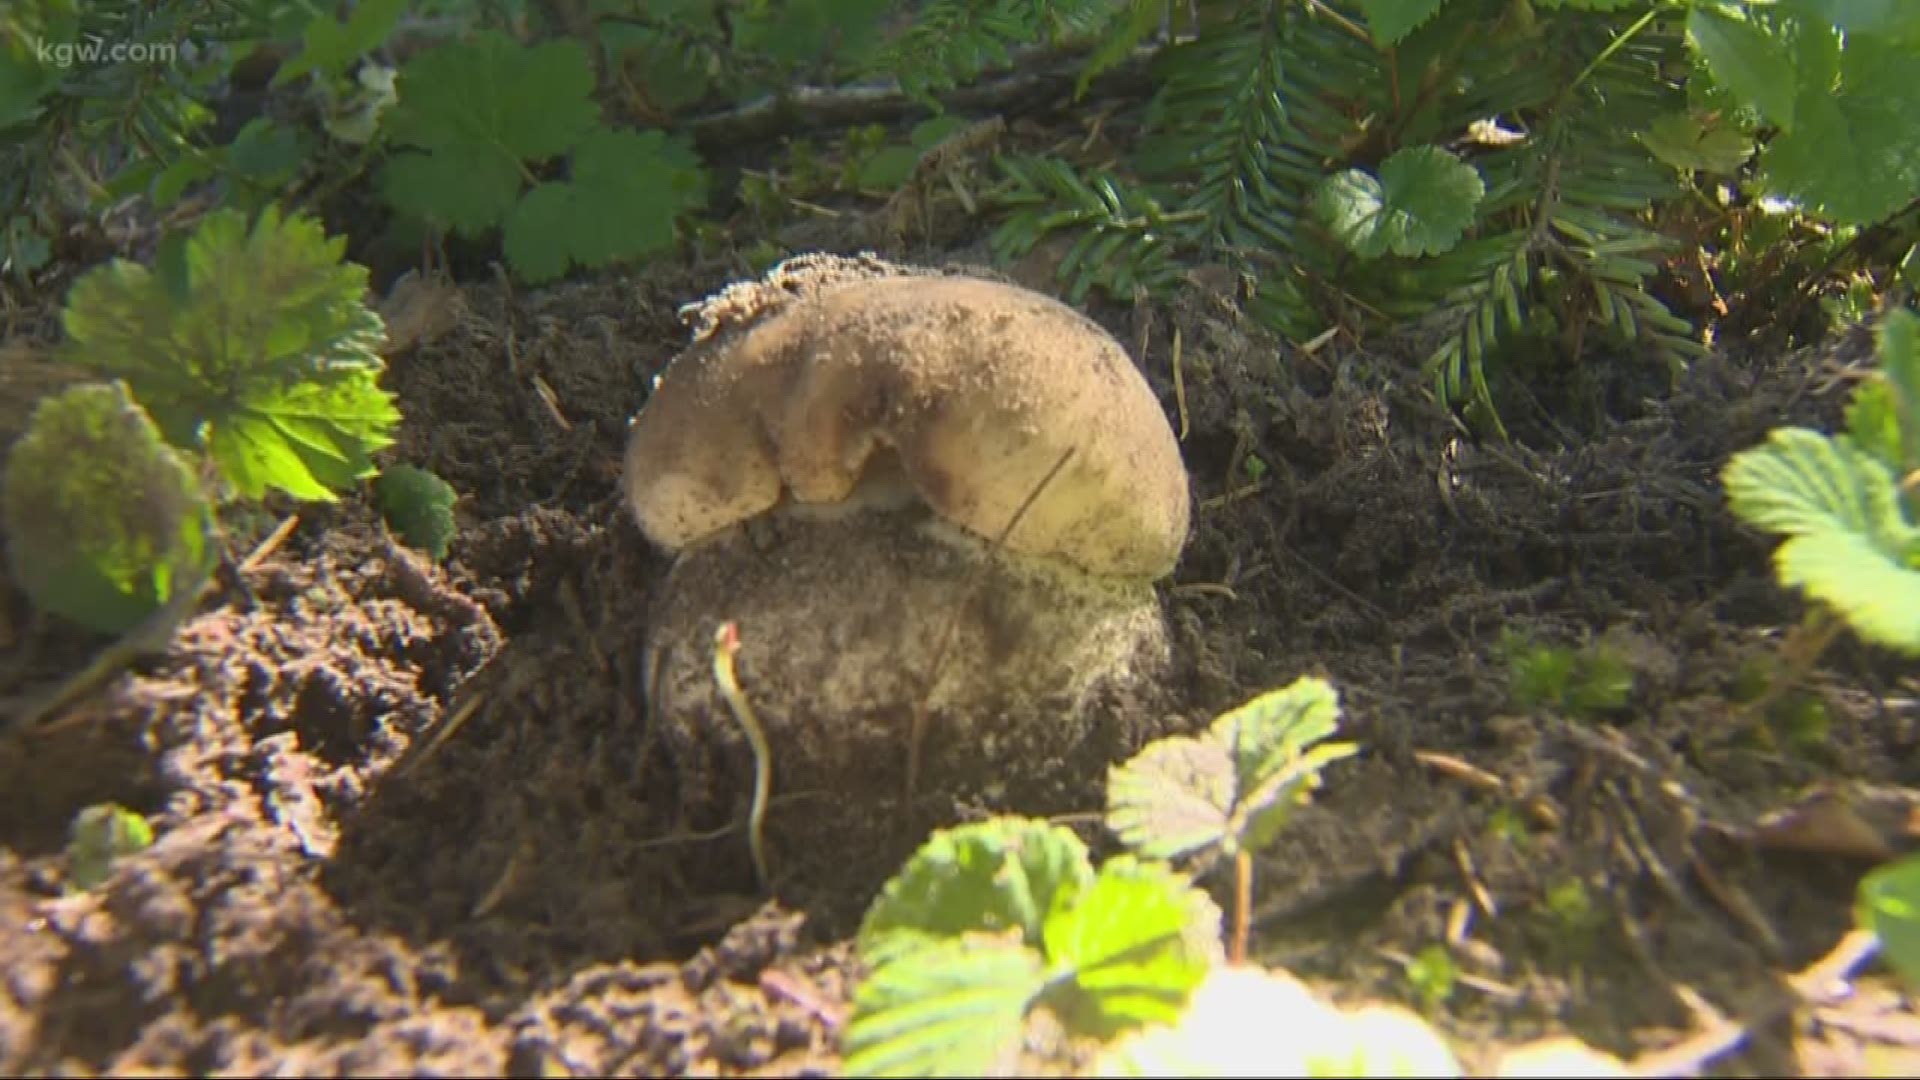 Summer is still packing a punch this week, but don’t tell the wild mushrooms that. The fall season has already started here in Oregon. It’s so early, a mushroom festival had to be moved up a whole week. On Sunday, KGW’s Brittany Falkers tagged along with a mushroom foraging expert, on the hunt for Porchini mushrooms.